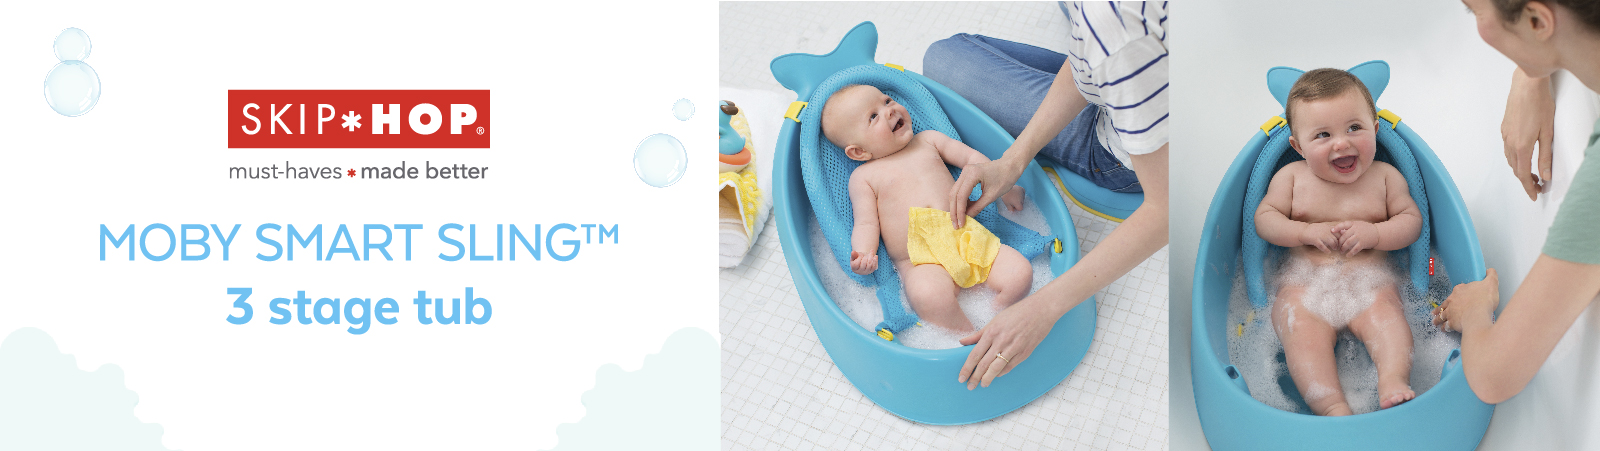 What Every Parents Wants in a Baby Bathtub: Skip Hop Moby Smart Sling 3-Stage Tub